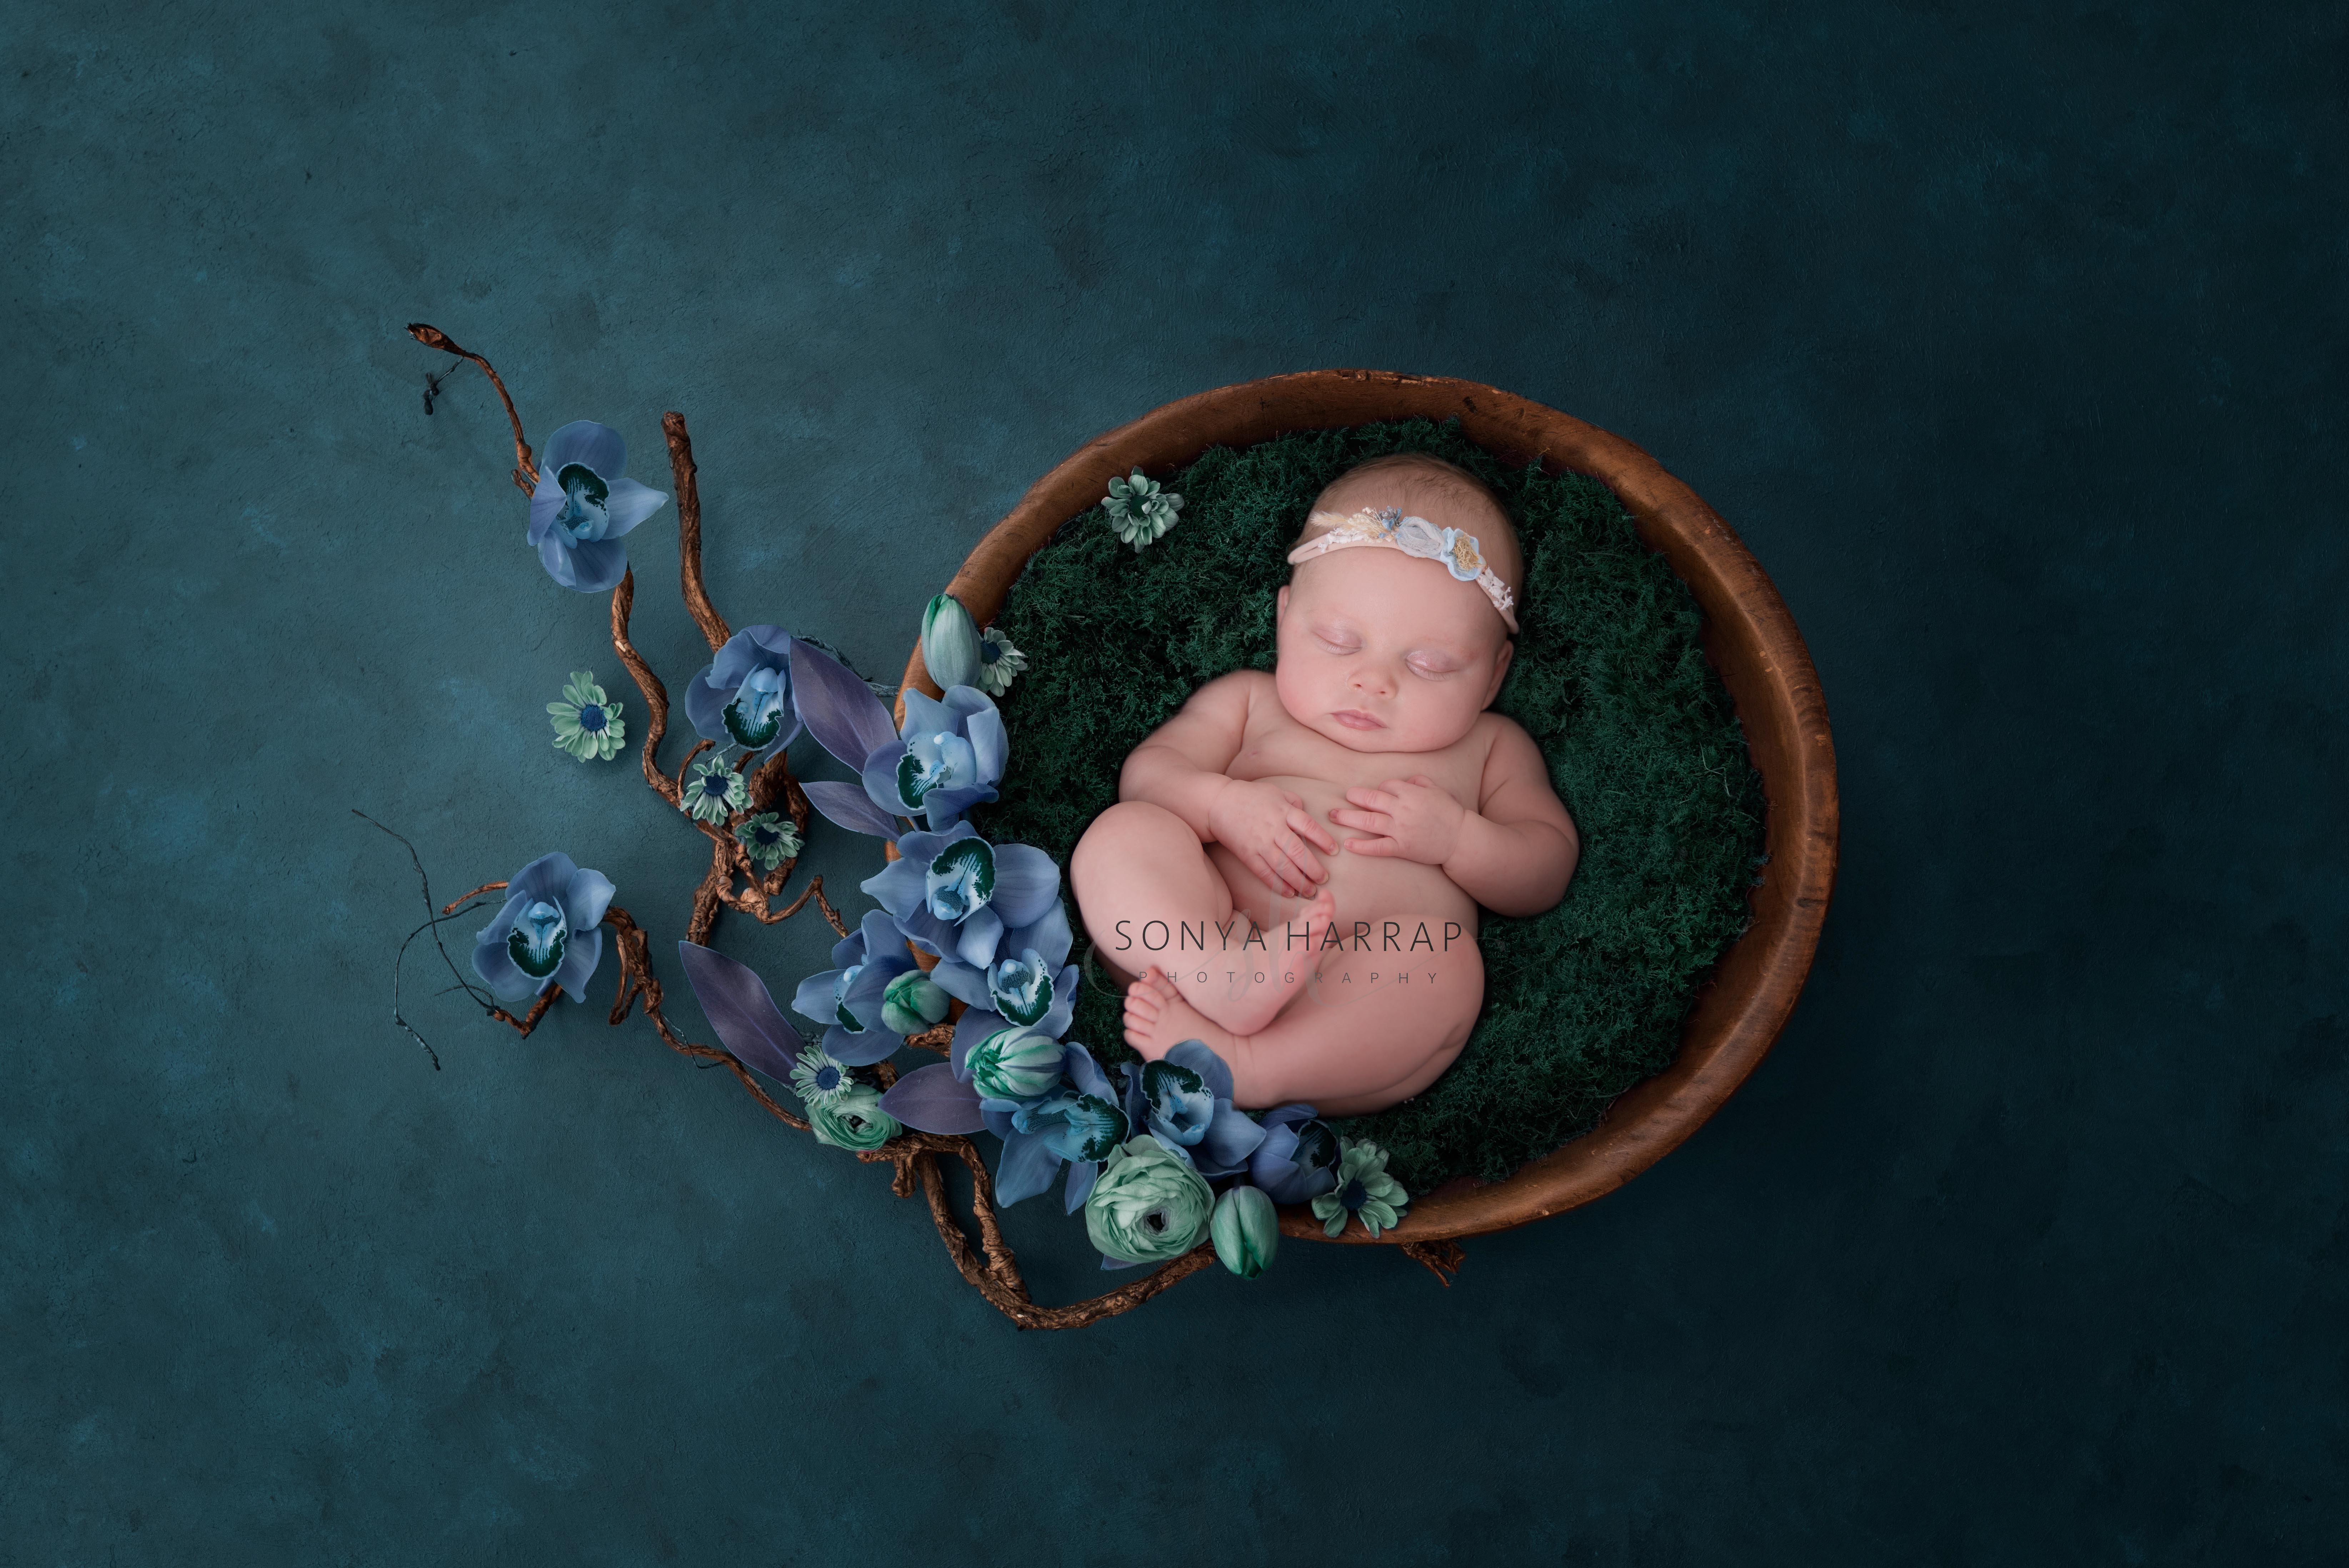 baby newborn wrapped up in bowl on blue background and flowers for newborn photoshoot by Sonya Harrap